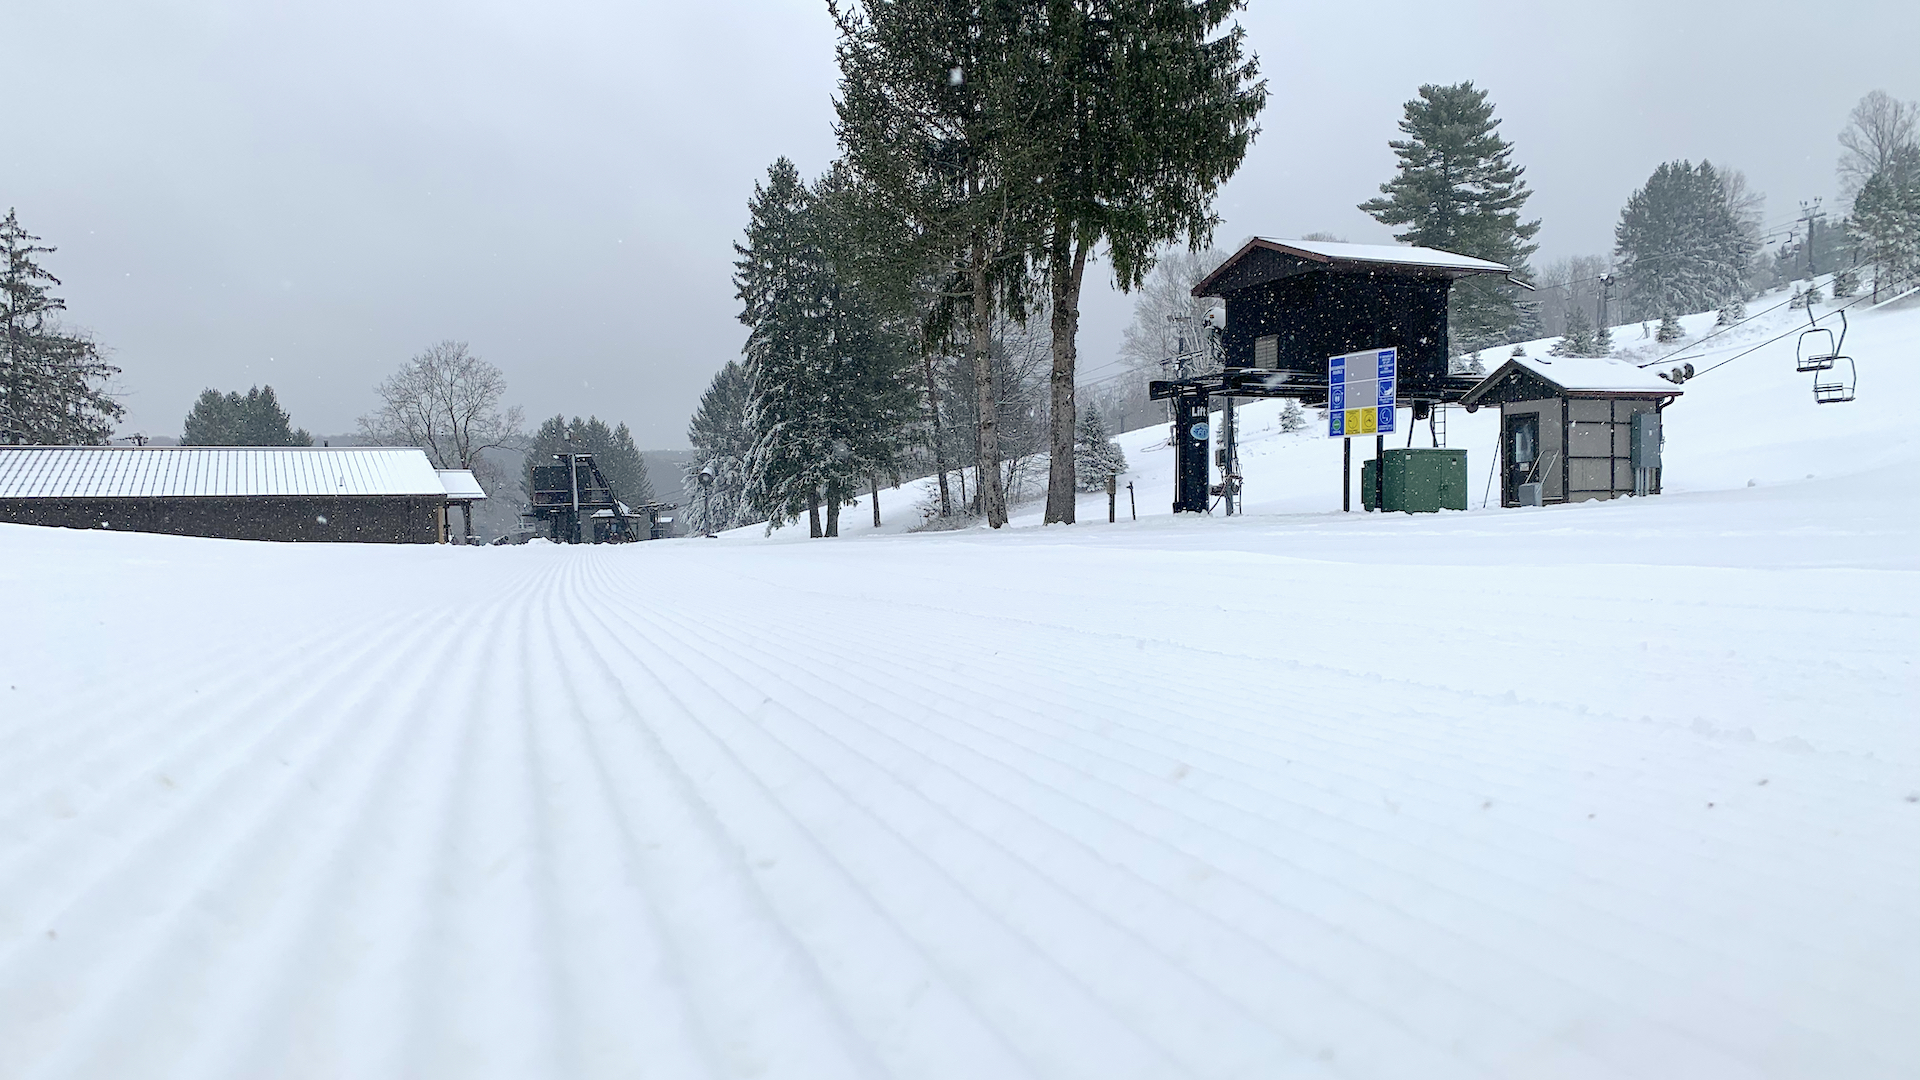 Opening The Slopes For Our 60th Anniversary Season